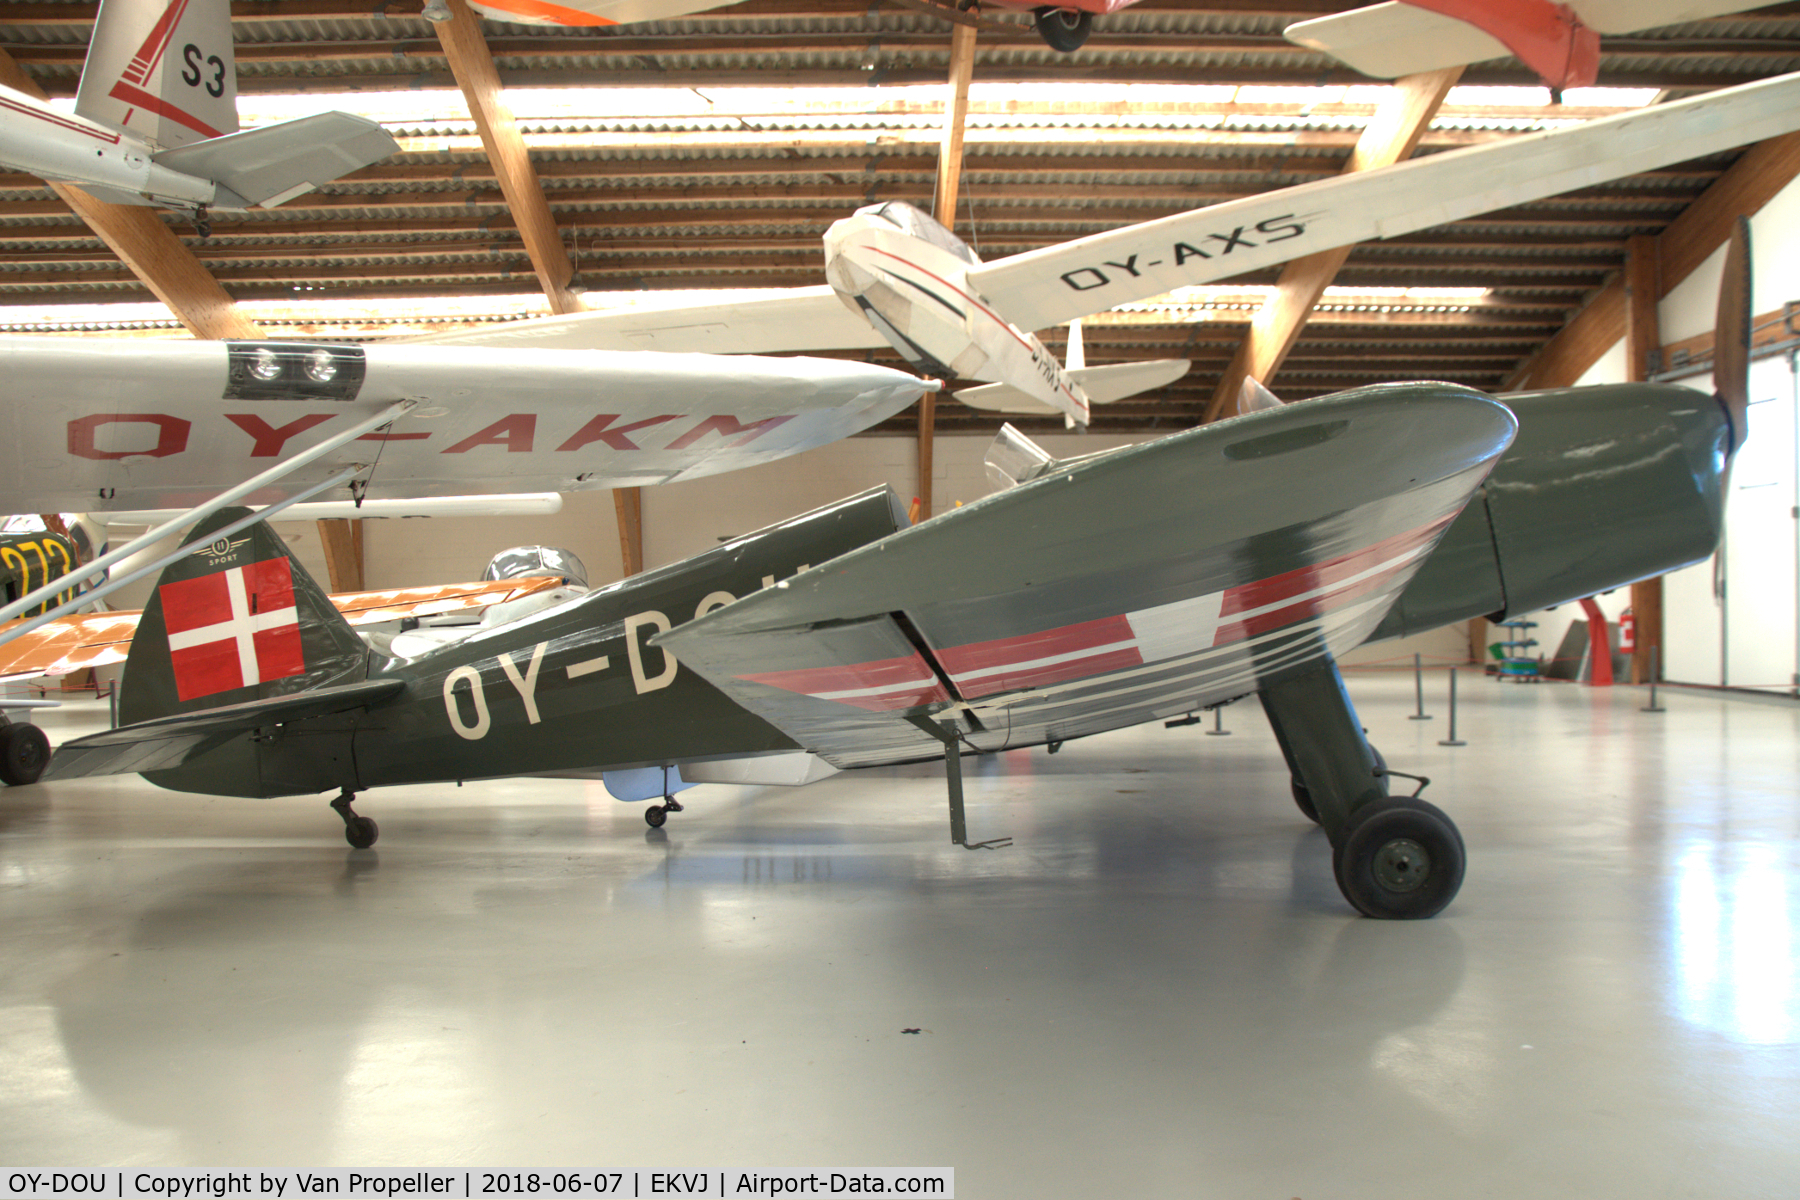 OY-DOU, 1938 SAI KZ II Sport C/N 13, SAI KZ II Sport in Danmarks Flymuseum at Stauning airport